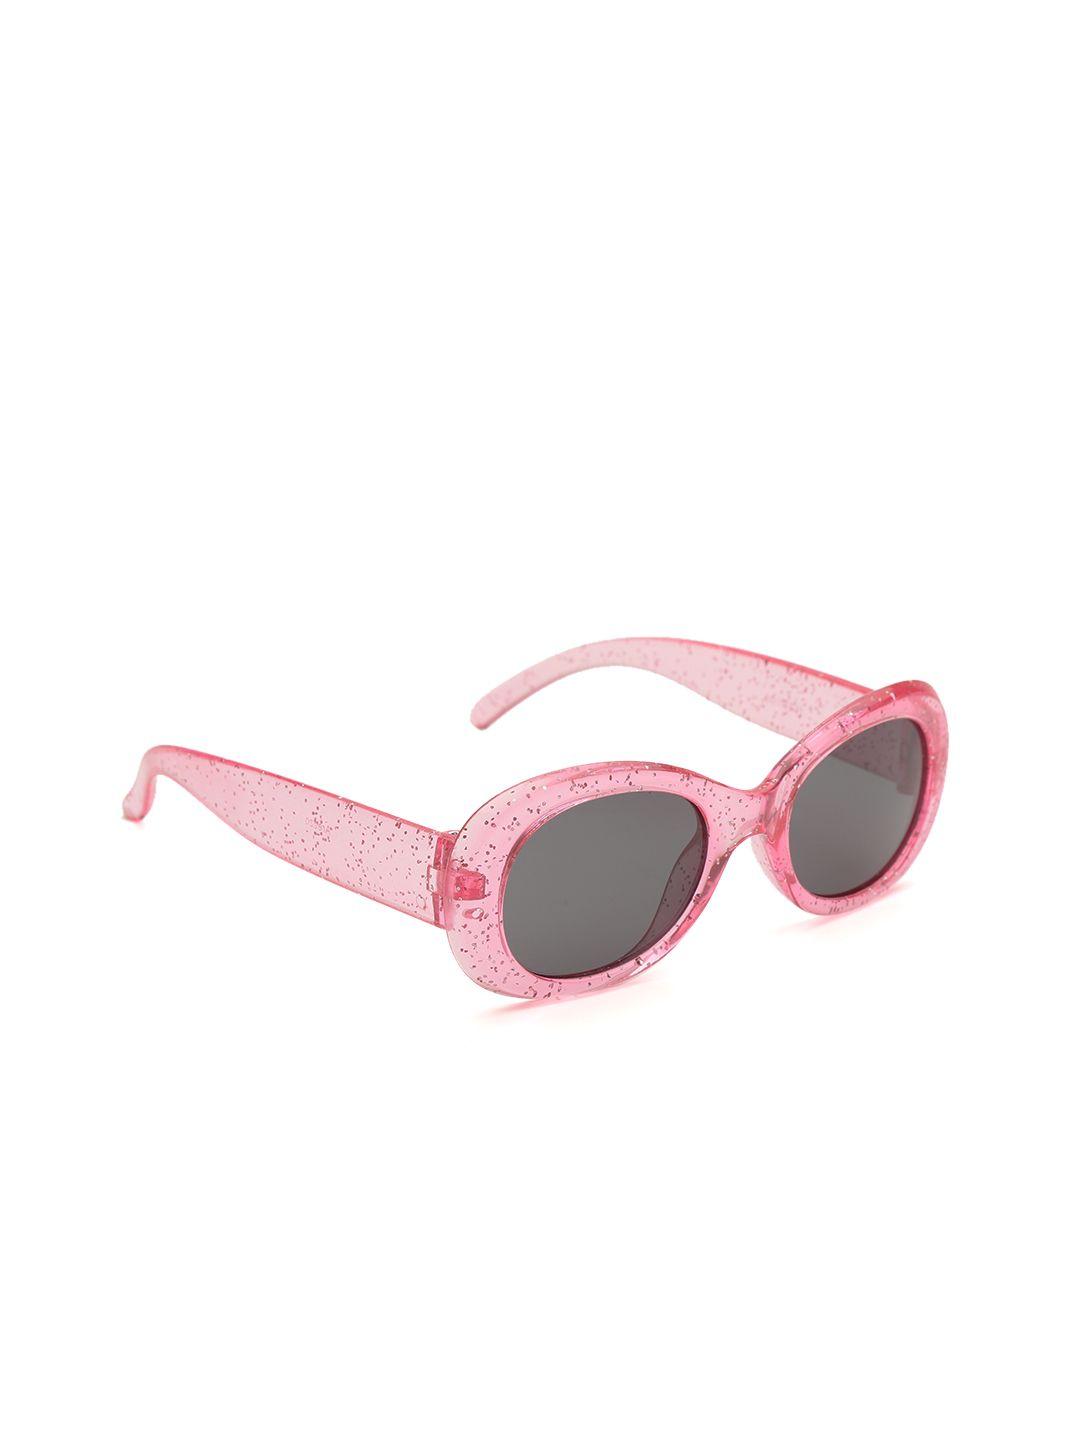 carlton london girls oval sunglasses with uv protected lens